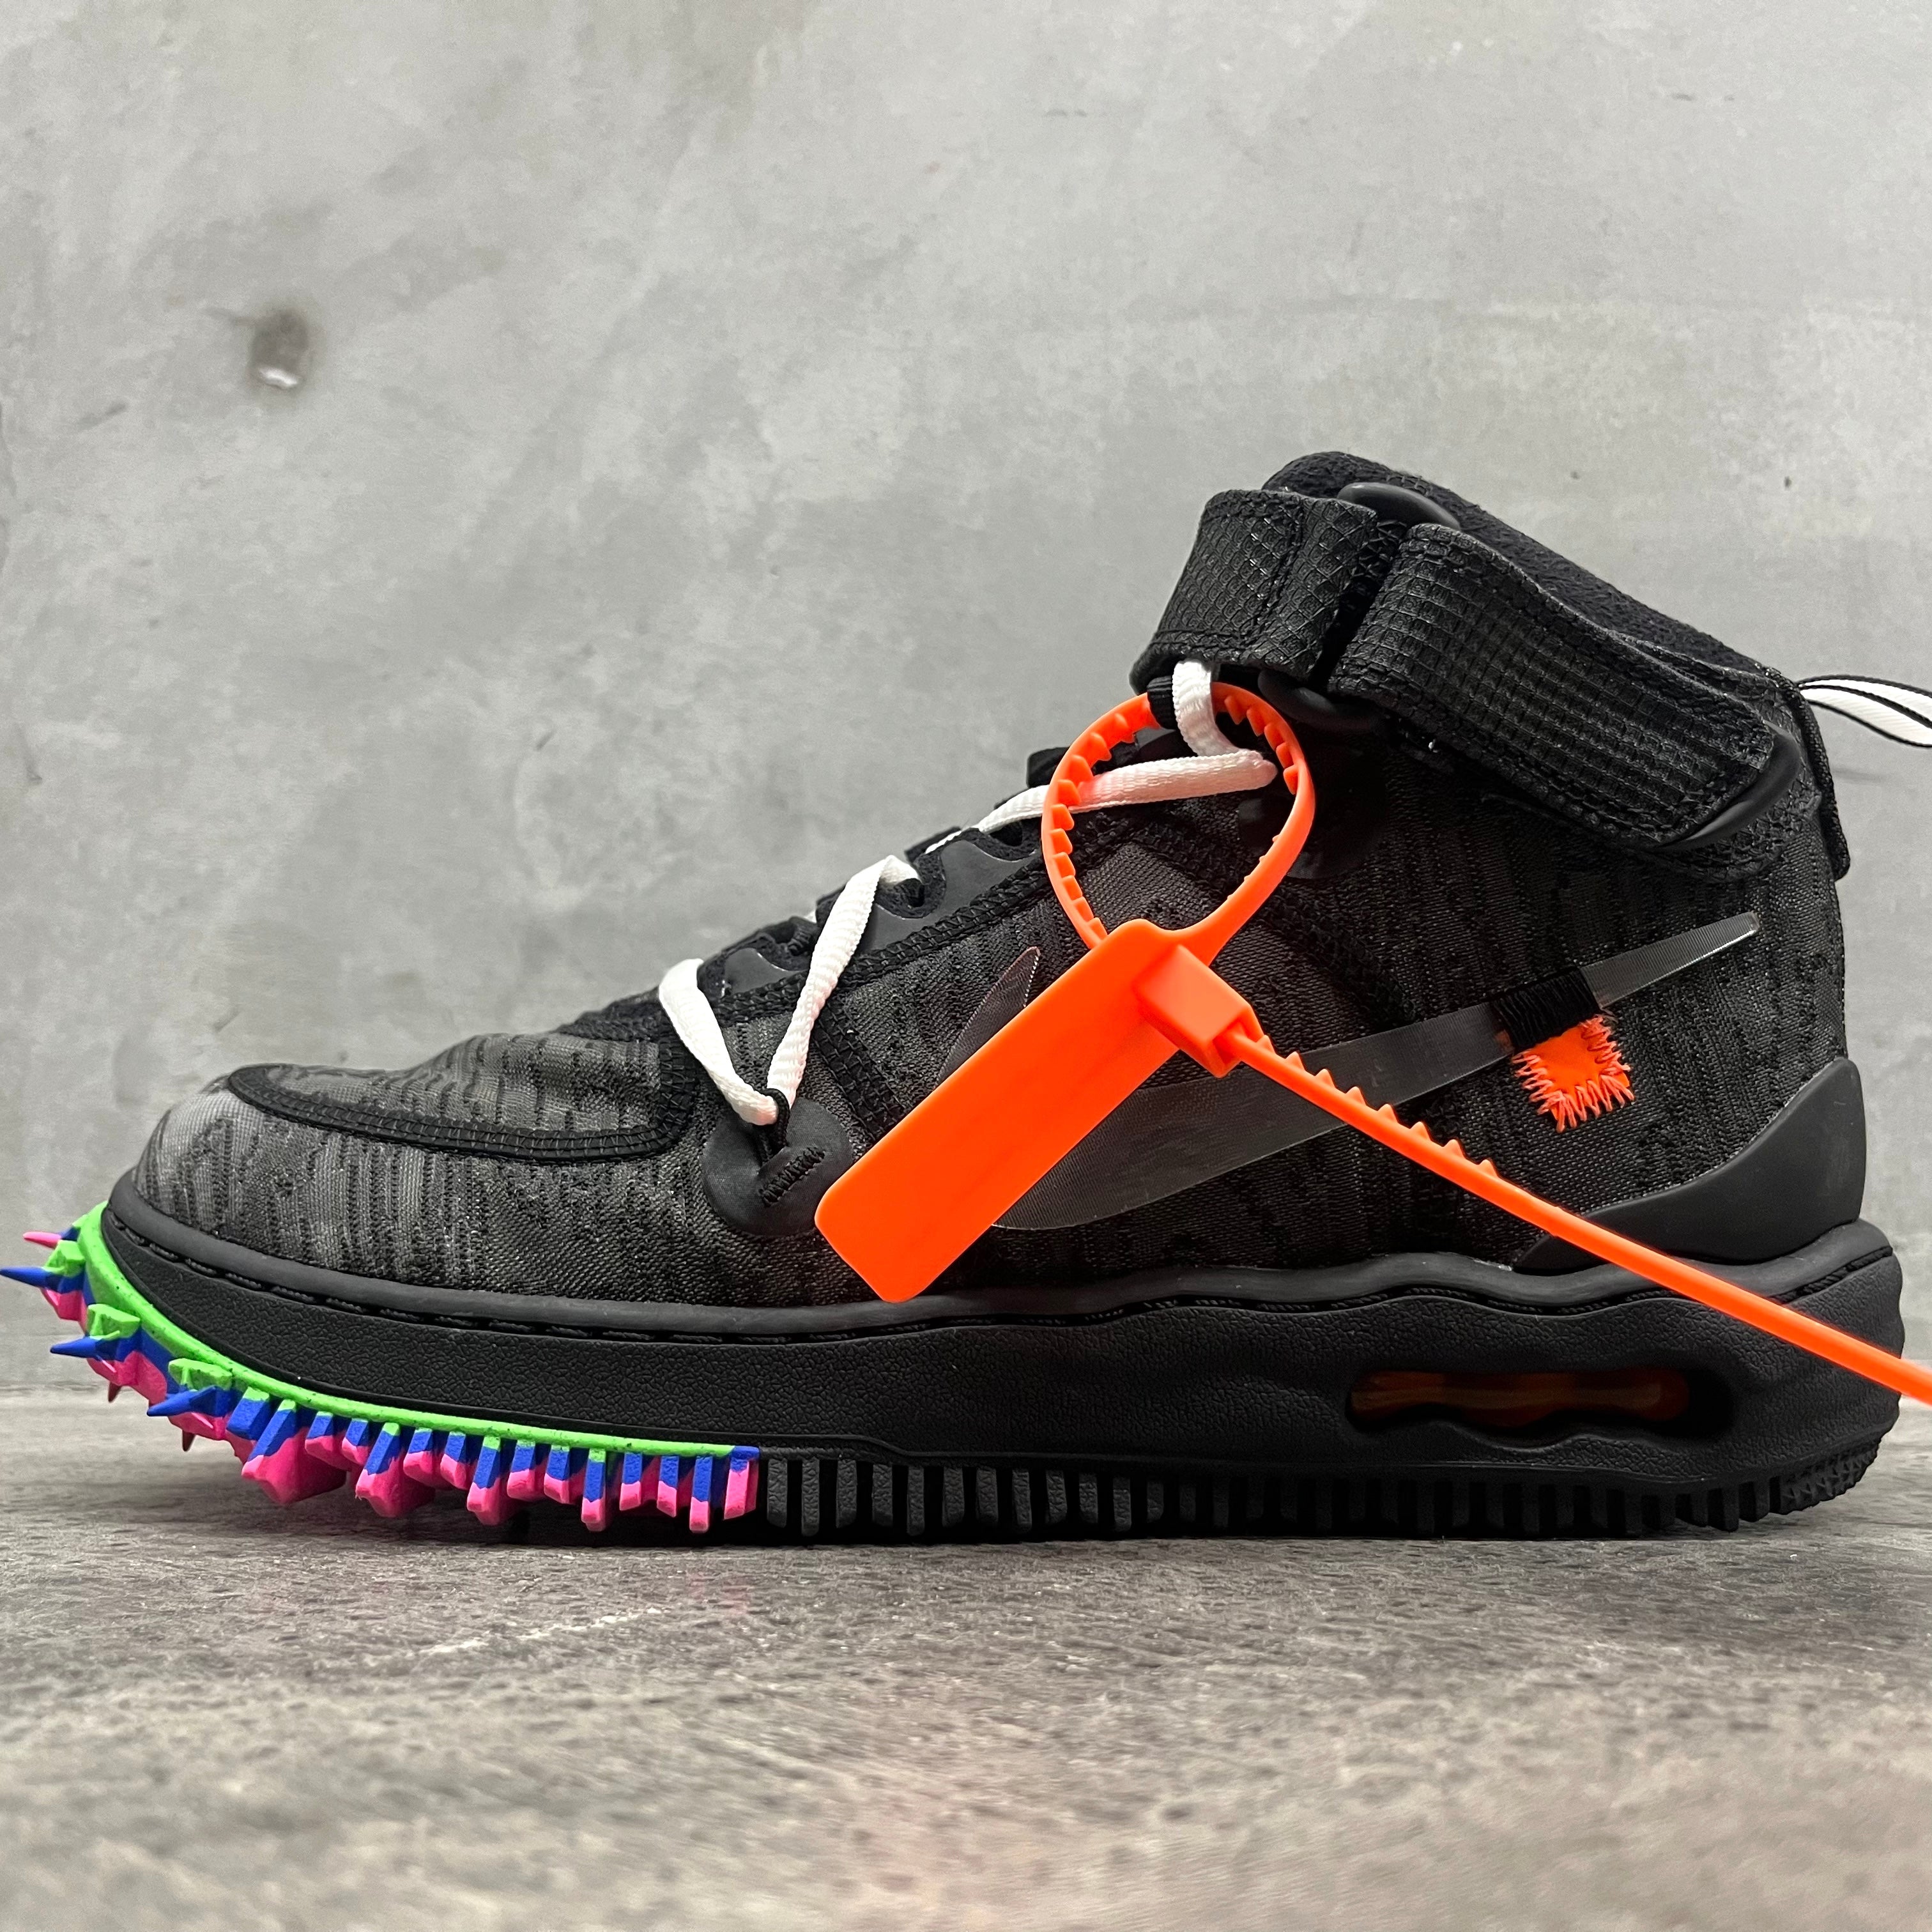 【US7.5】NIKE AIR FORCE 1 MID SP "Off-White Black" DO6290-001